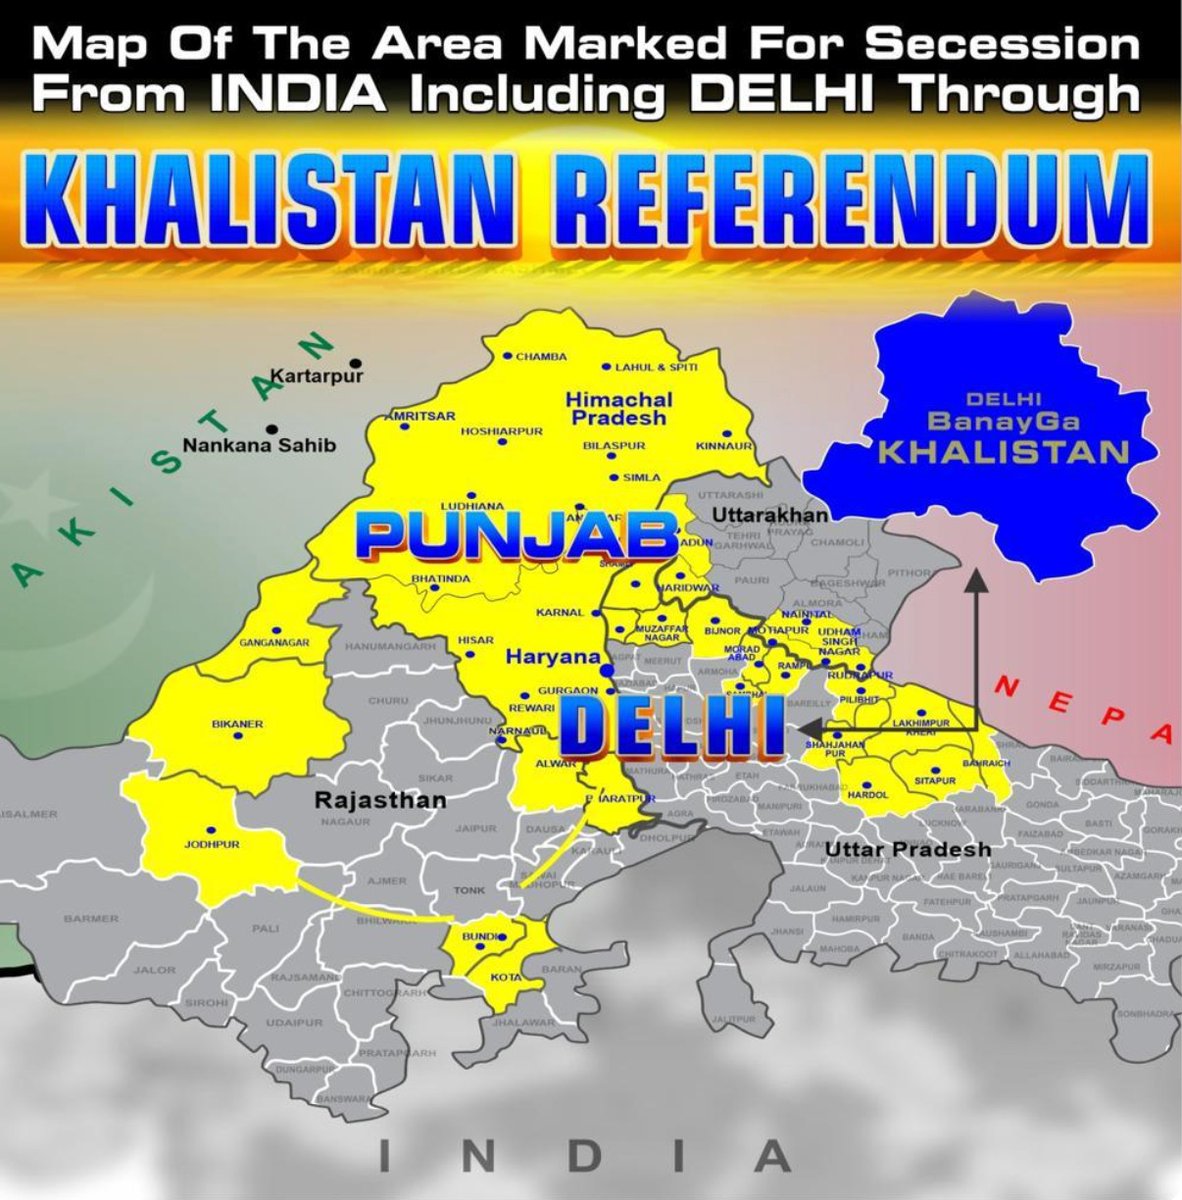 🤬 Gurpatwant Singh Pannun's map extending the boundaries of Delhi into Khalistan territory is absurd and condemnable! 😡 We stand for a united India. 🇮🇳 #NoKhalistan #UnitedIndia